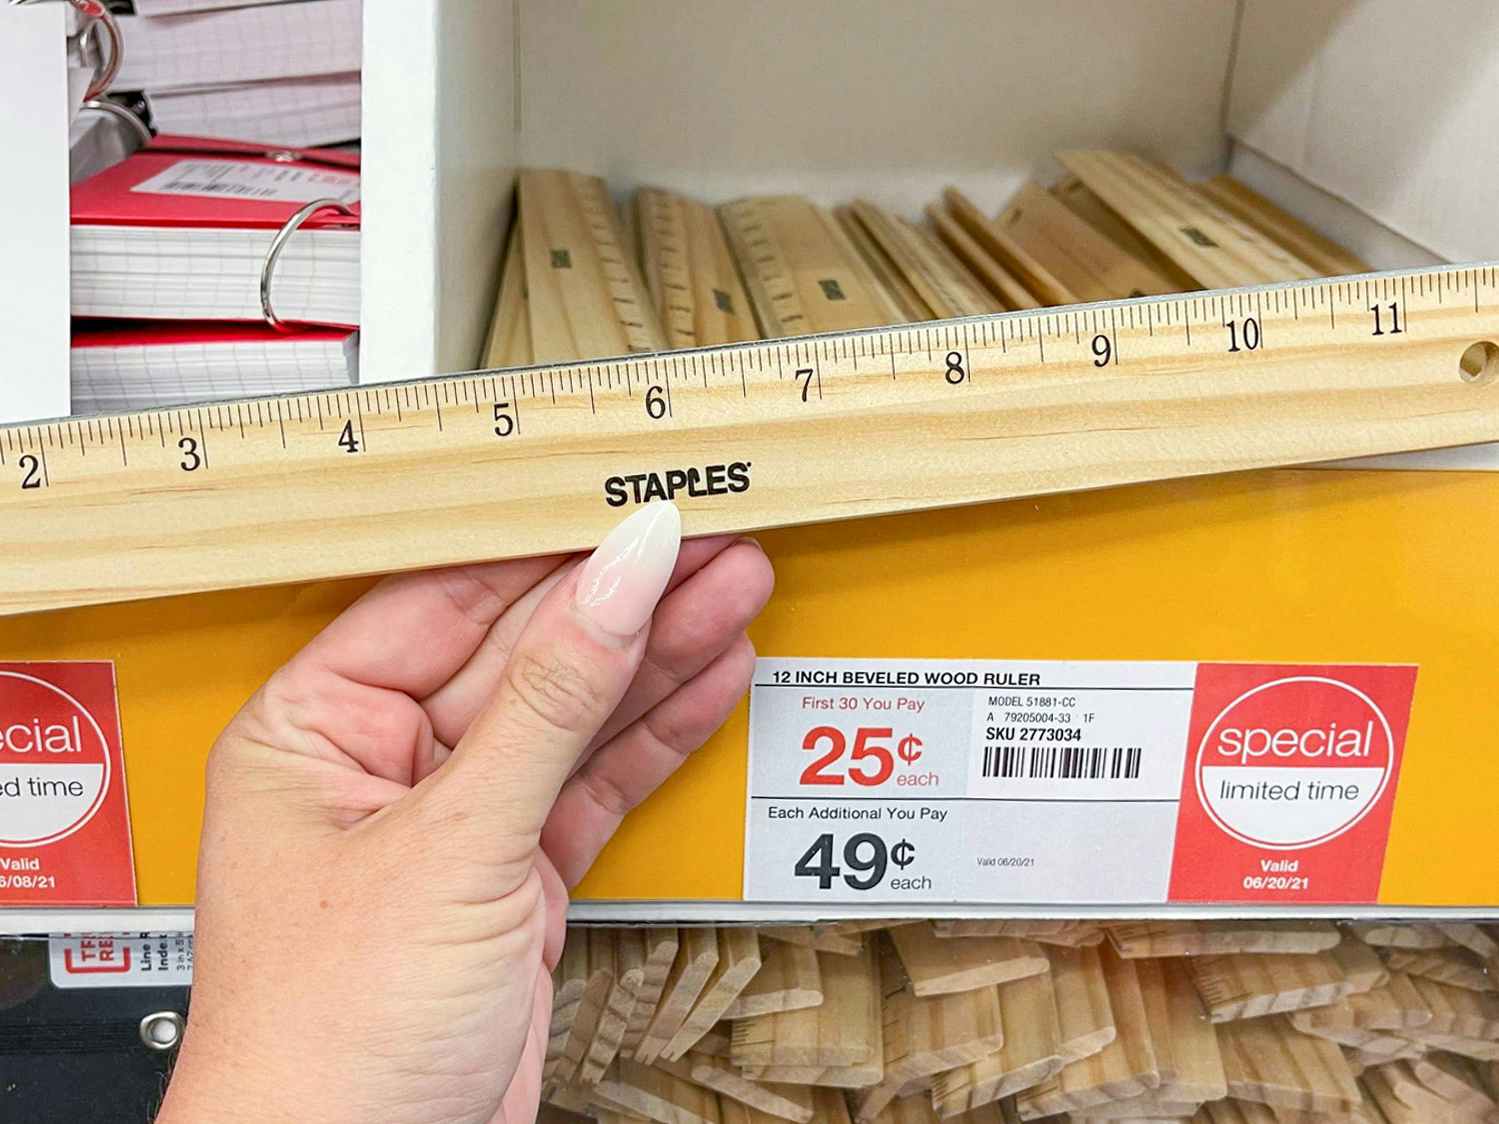 A person's hand holding a Staples ruler in front of a shelf with more rulers on sale for $0.25 at Staples.